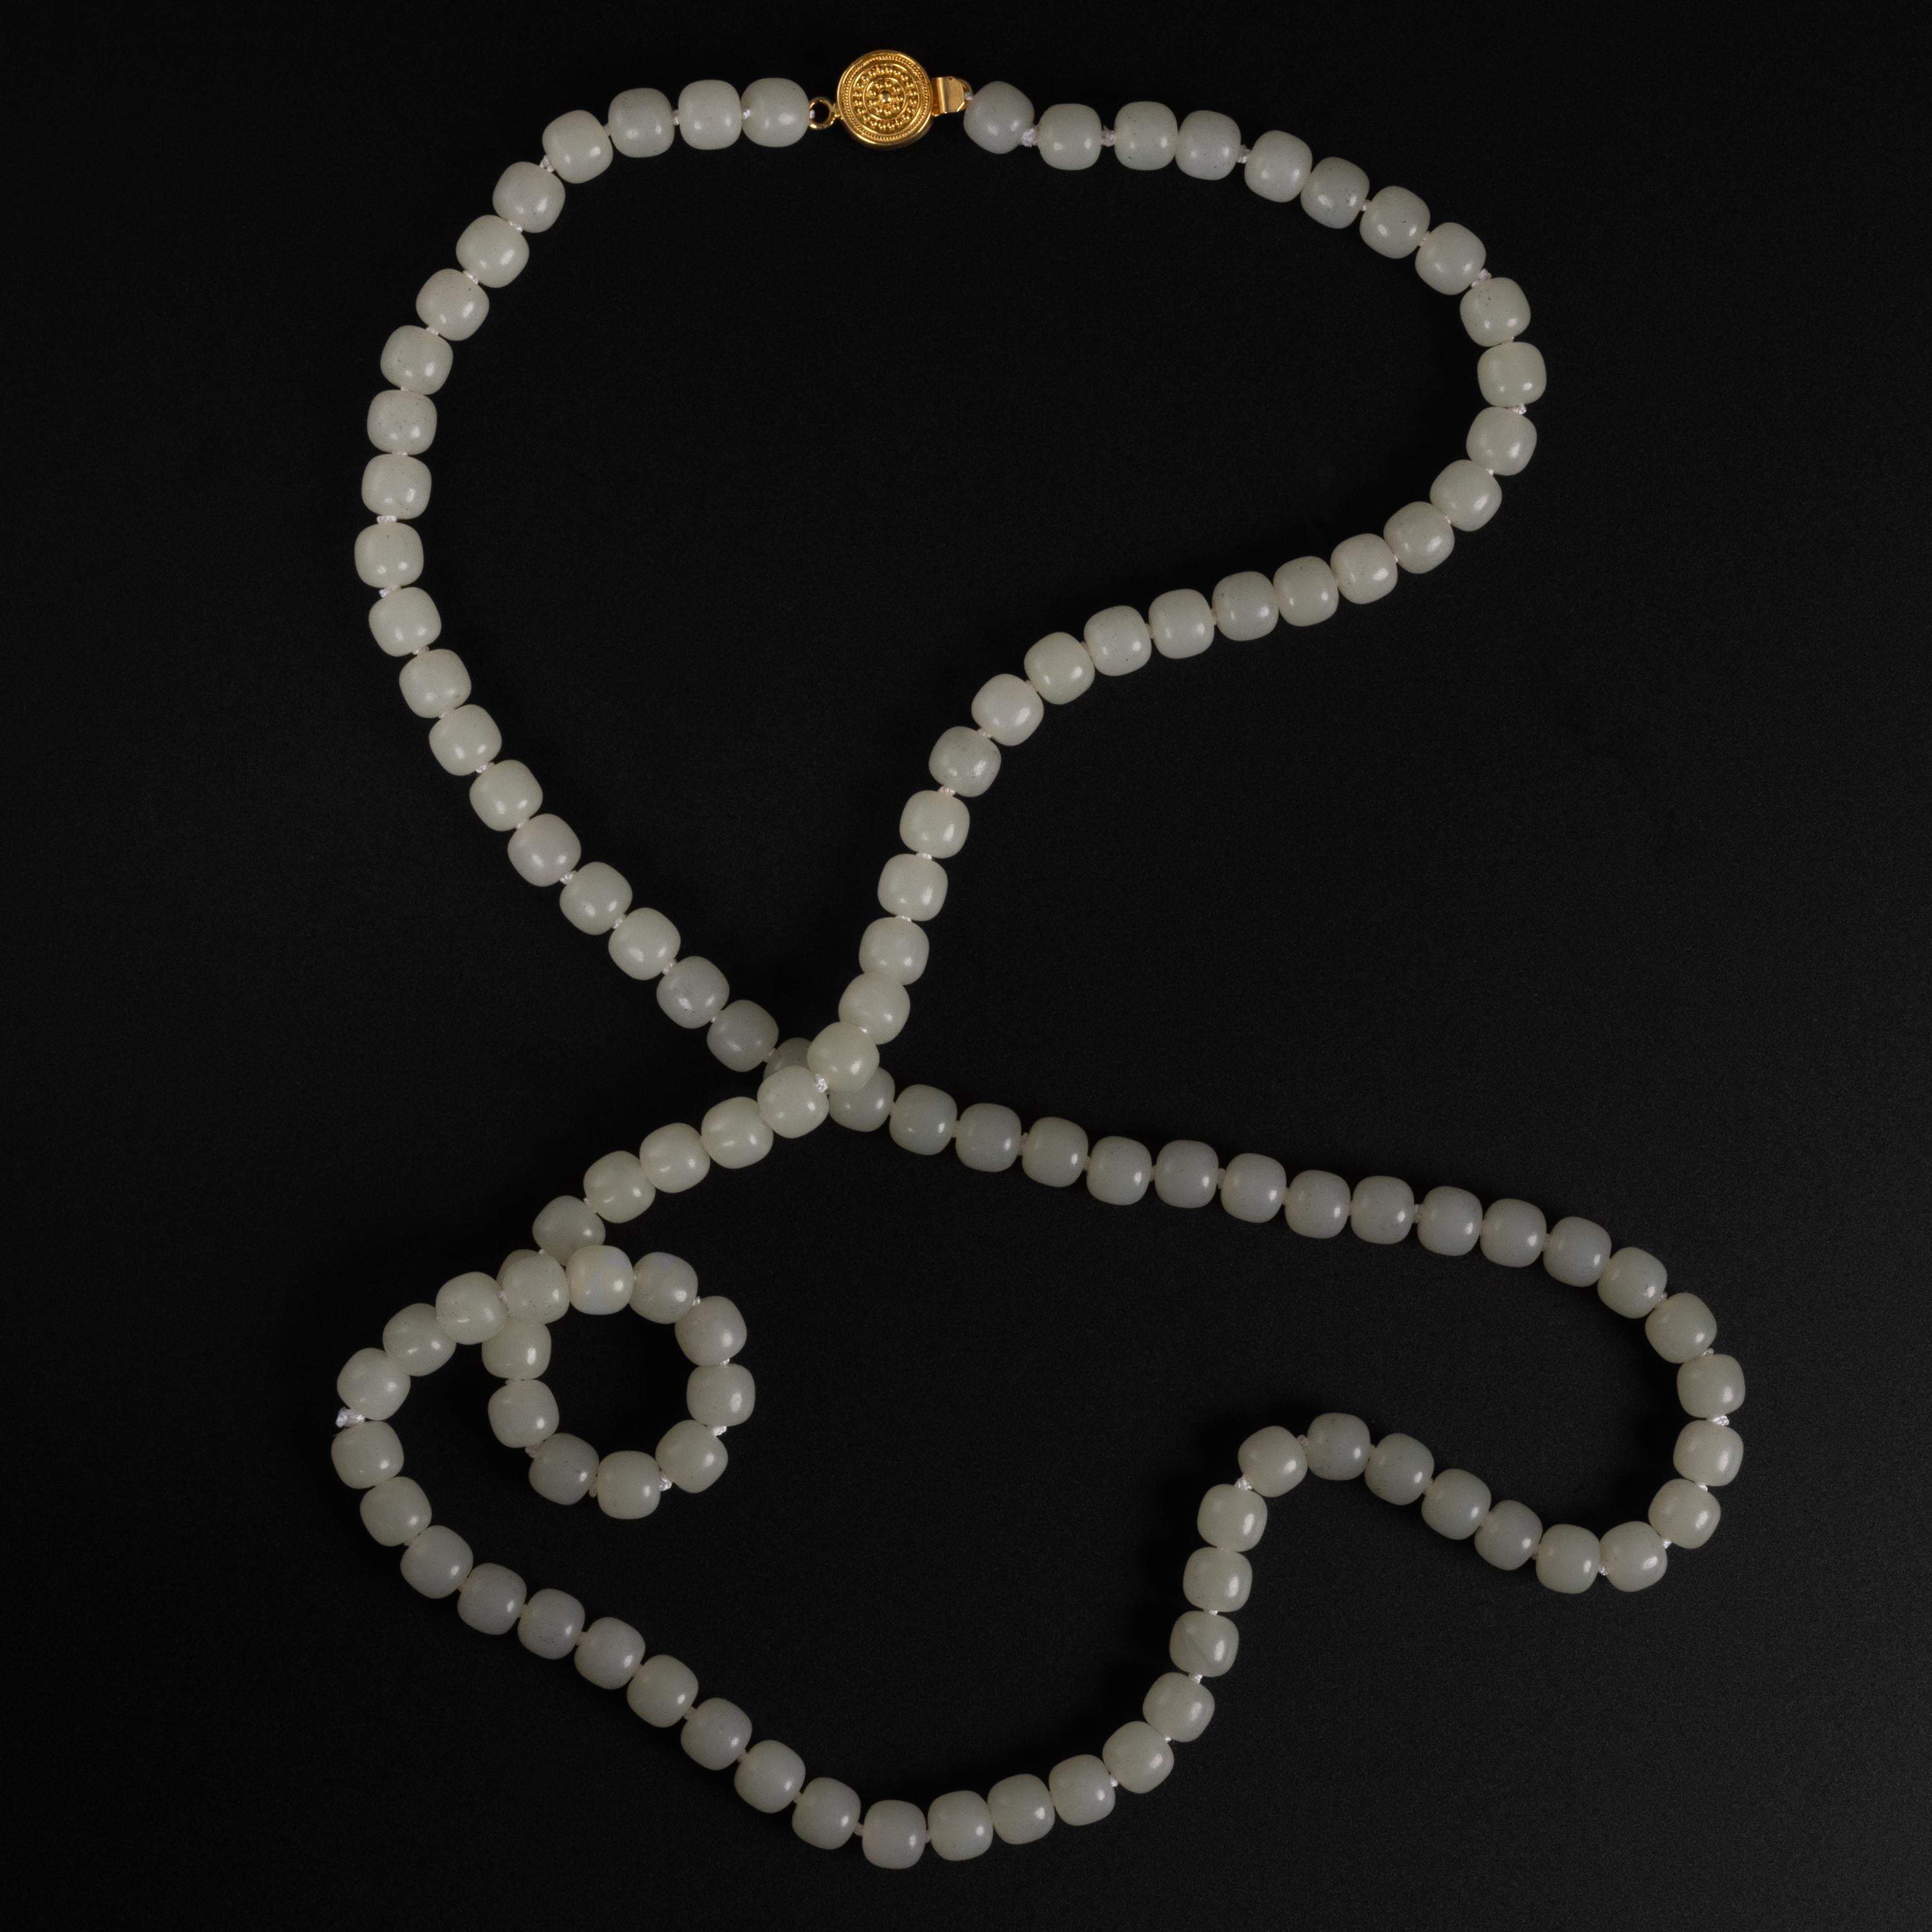 This gorgeous and unique necklace is composed of 109 8mm hand-cut and polished barrel-shaped white nephrite jade beads. The beads have a delicate polish; not slick and high gloss but rather old-school: waxy, subtle. Exactly the kind of polish that